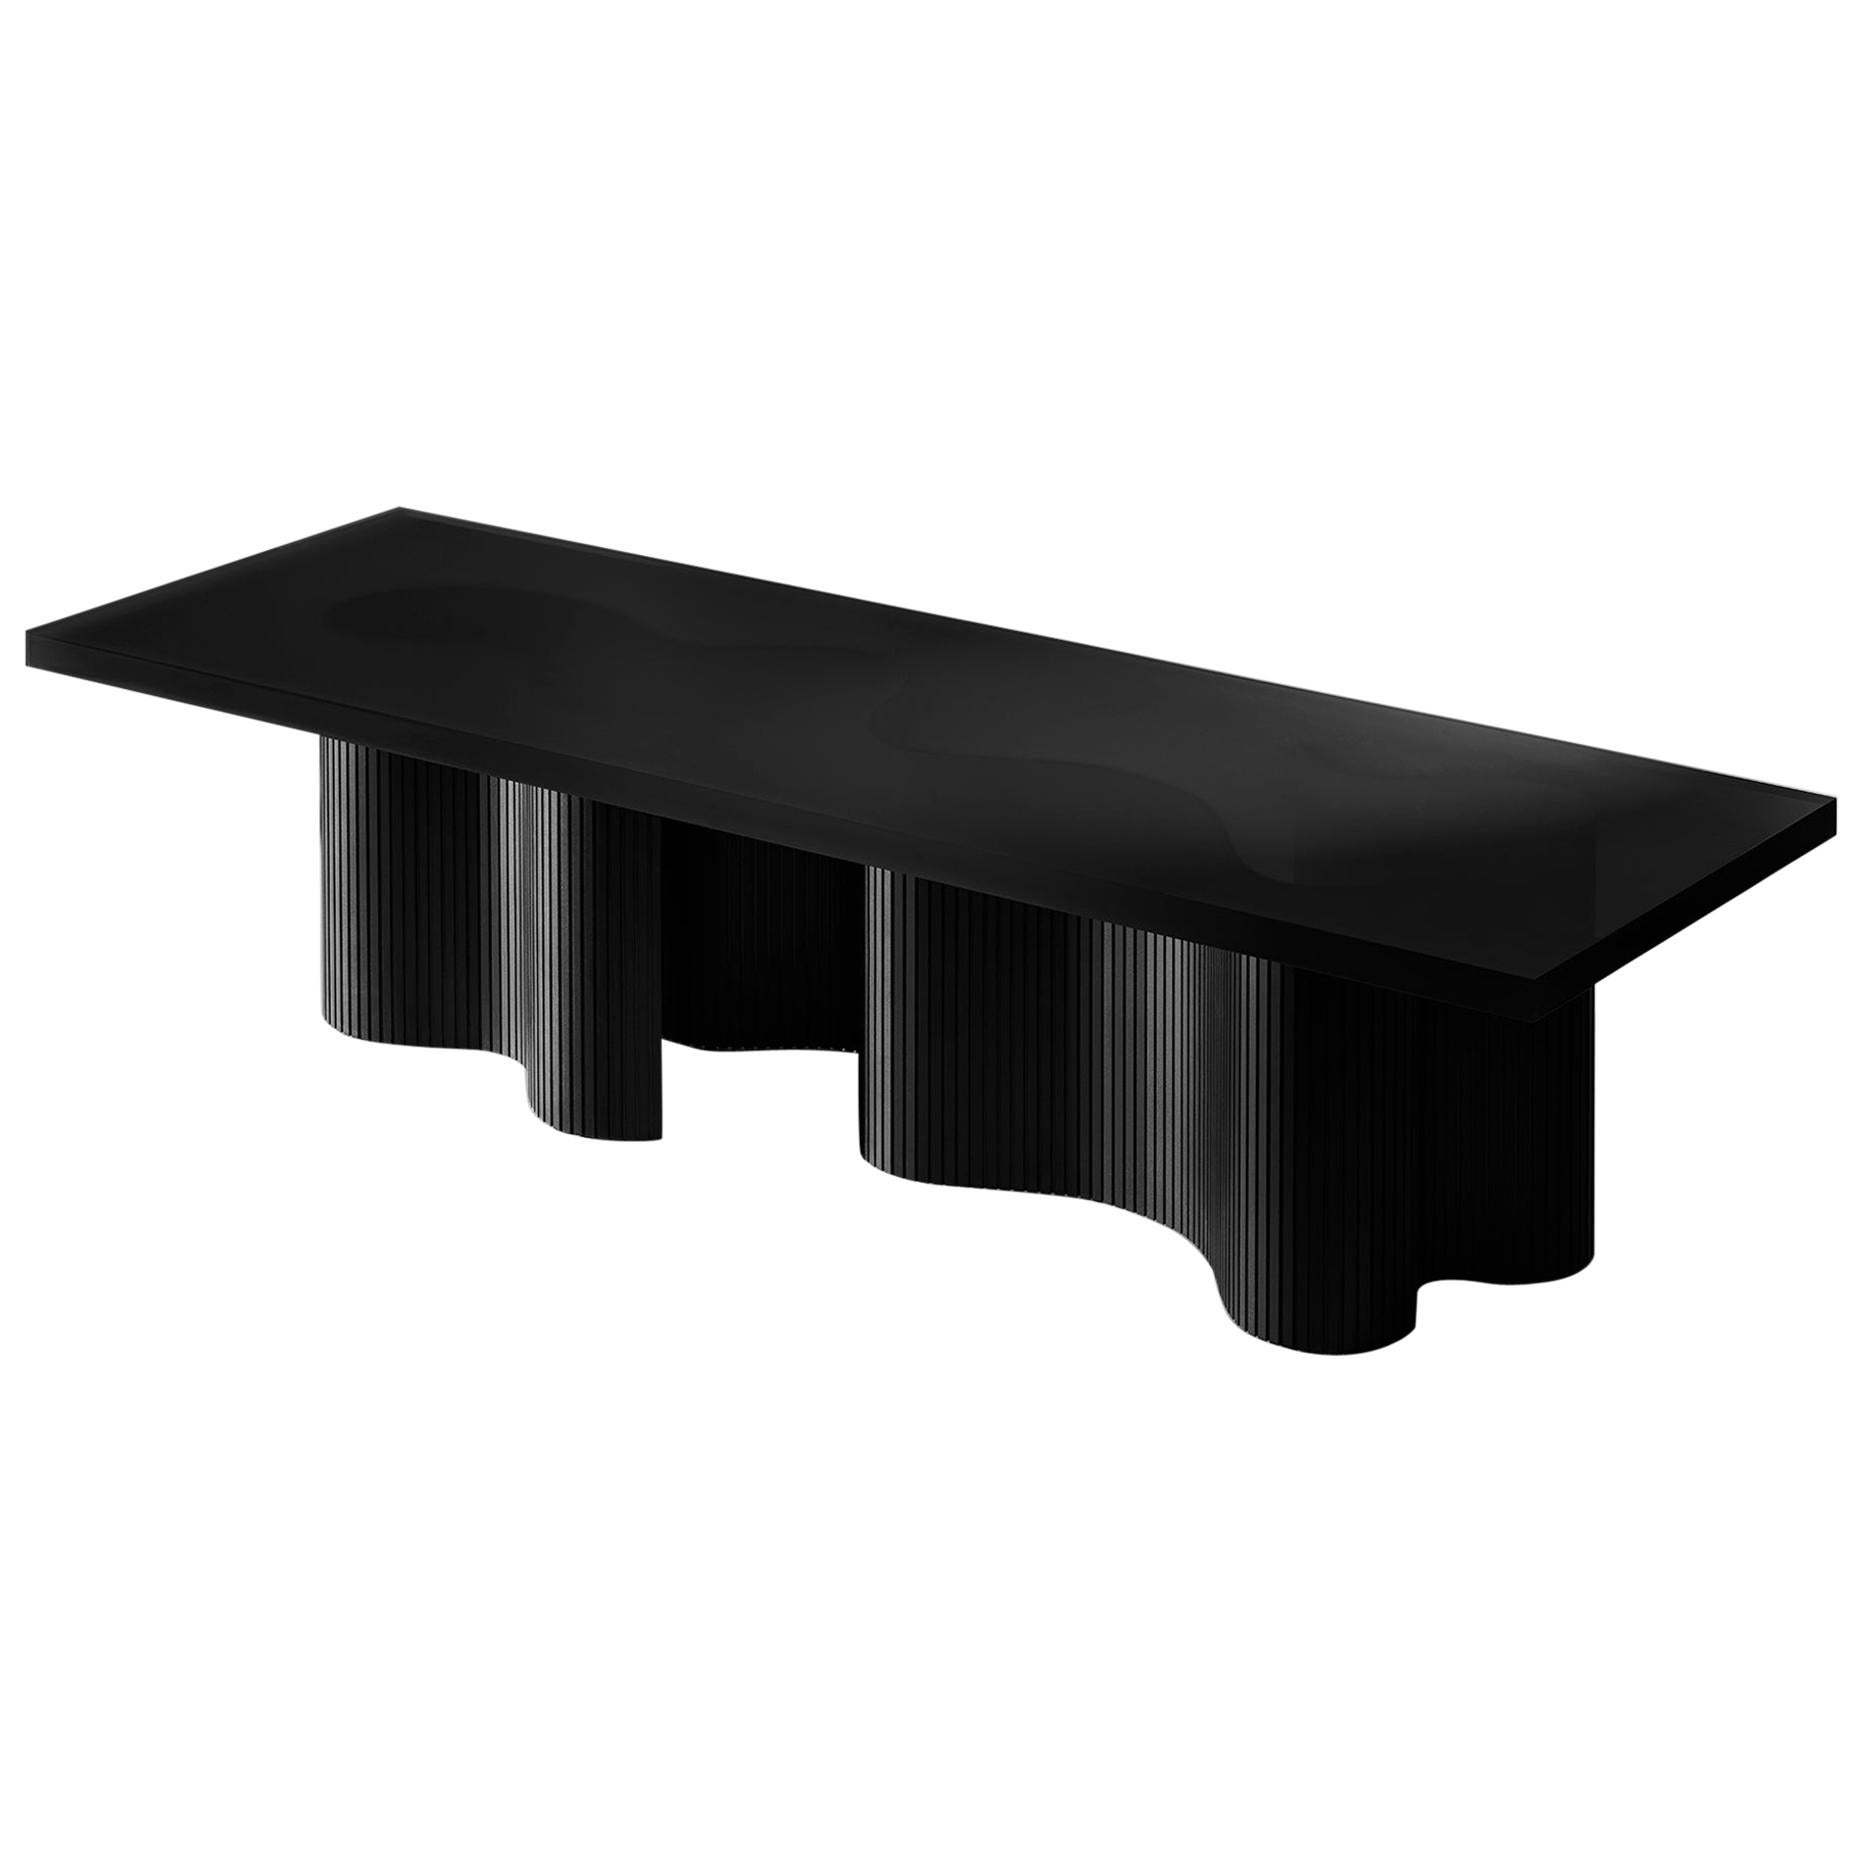 Contemporary Resin Coffee Table, Black Polished Spine Table, by Erik Olovsson